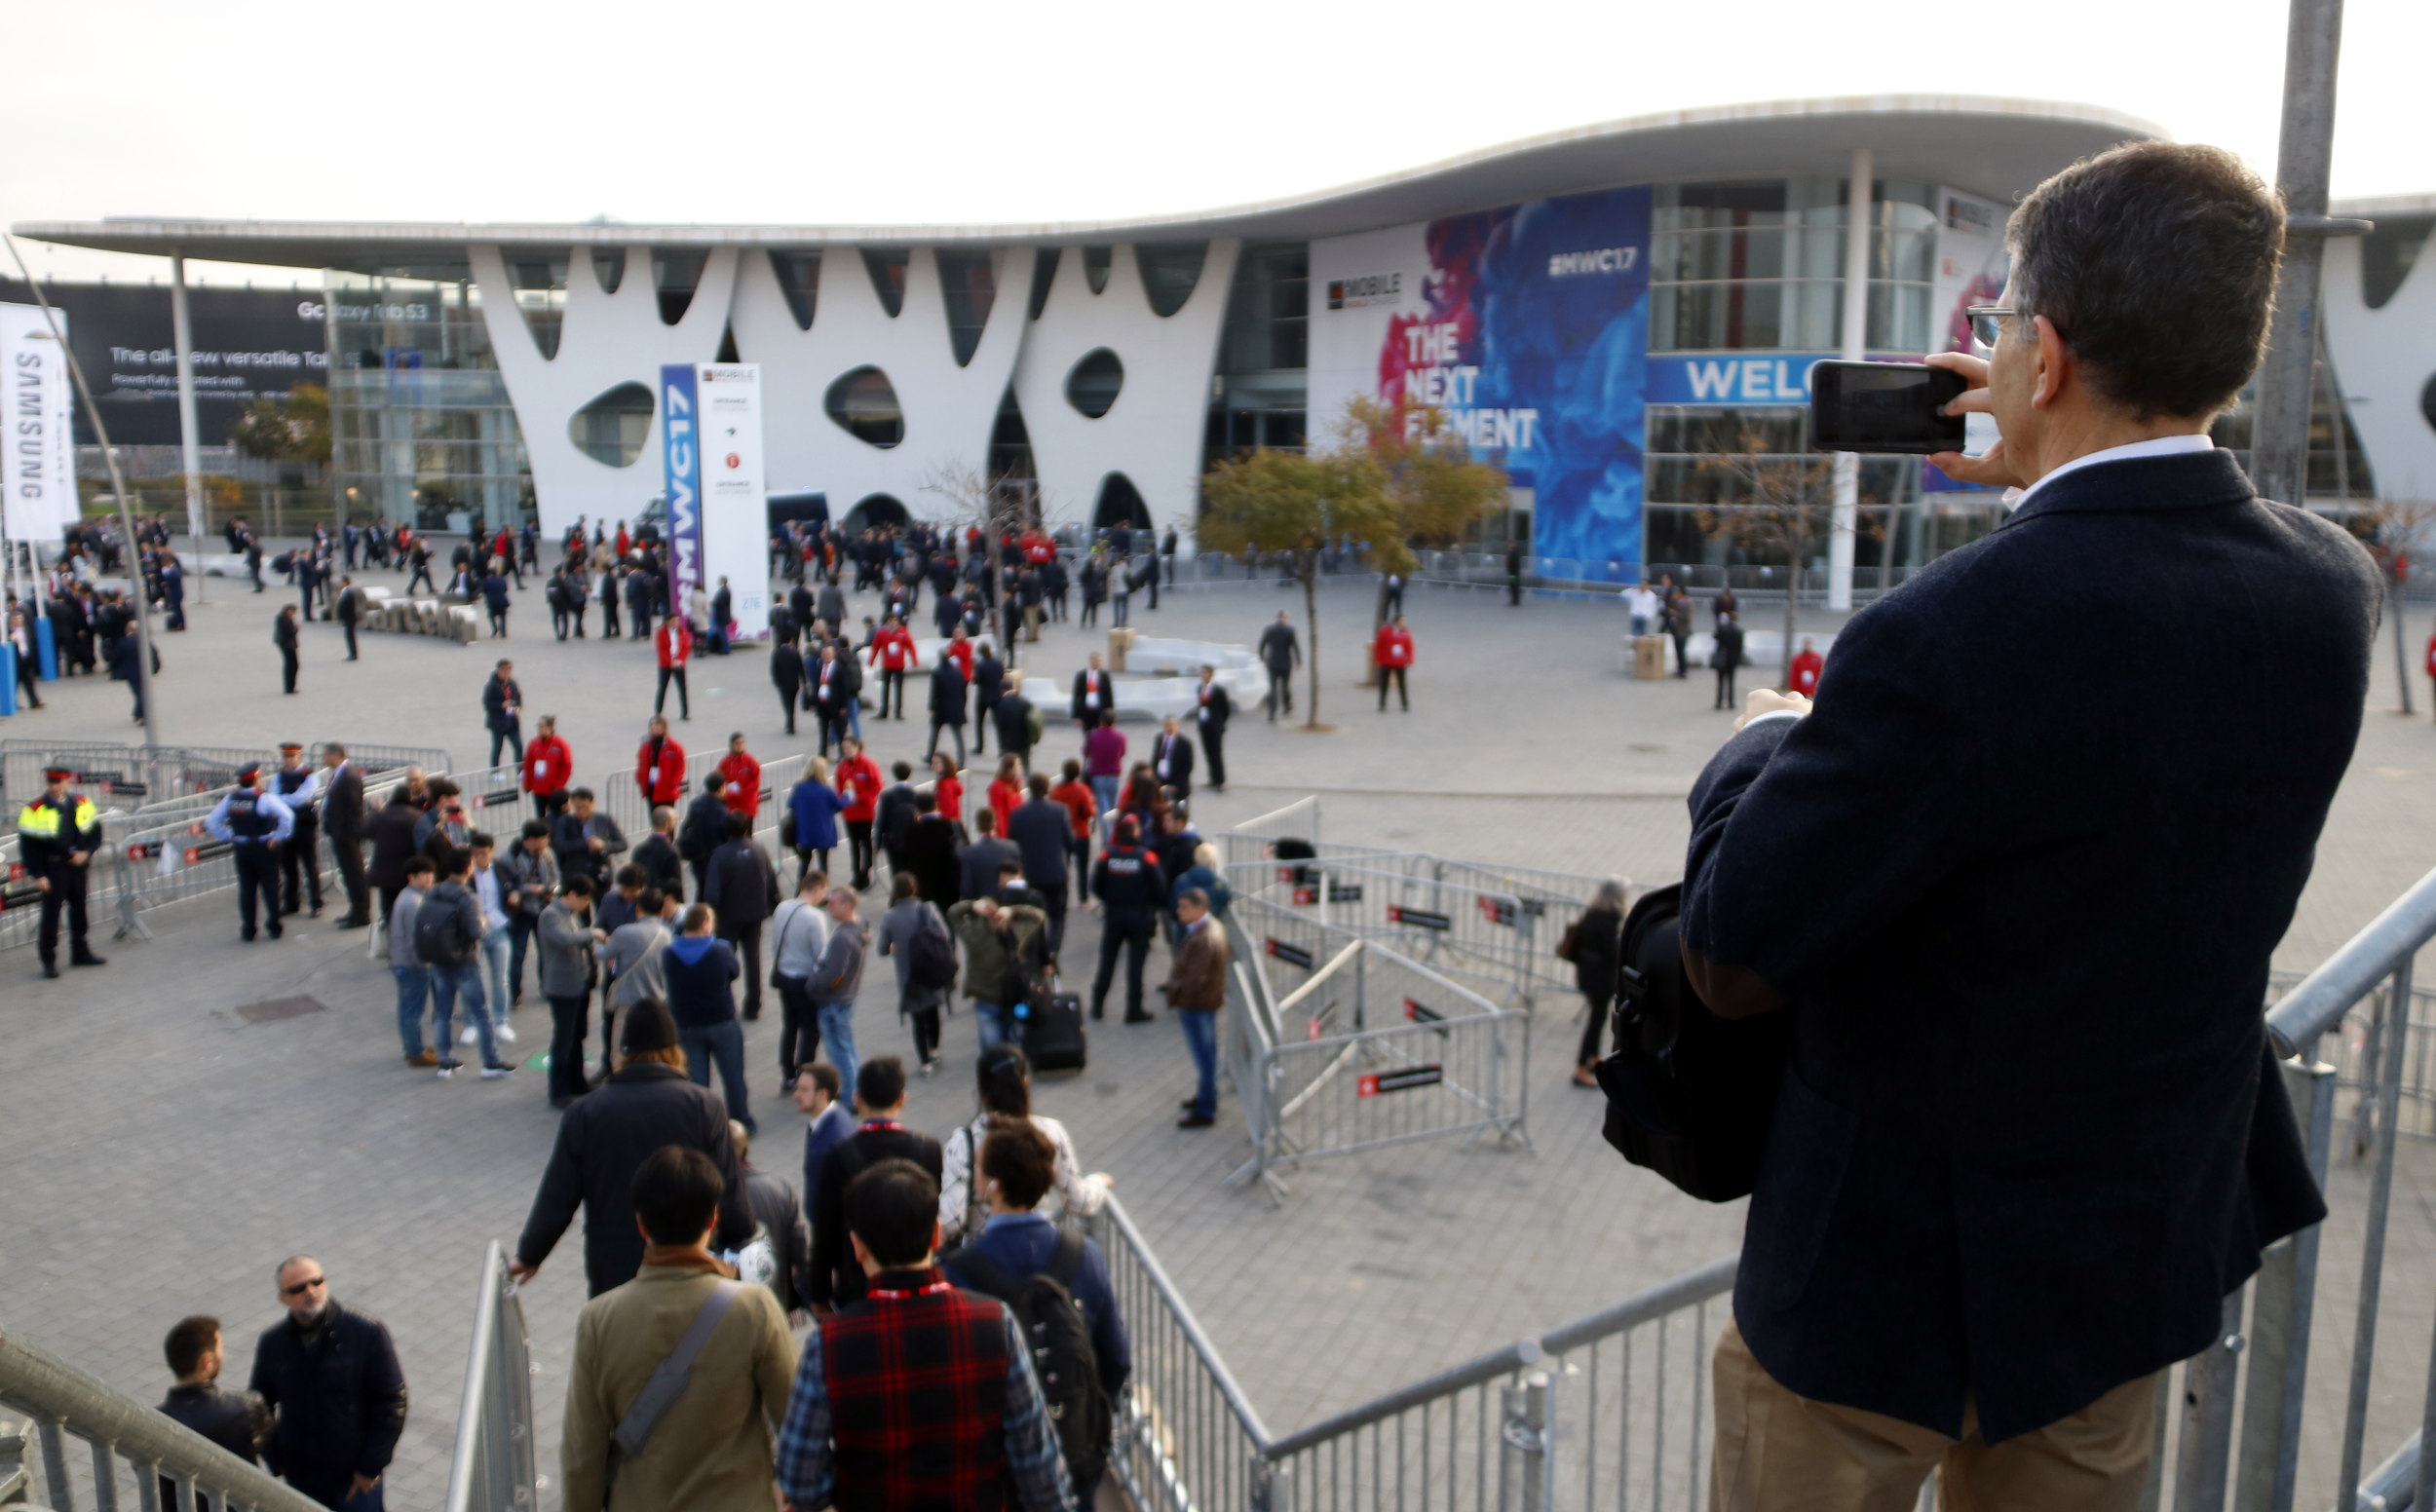 An attendee of the MWC taking a photo (by ACN)